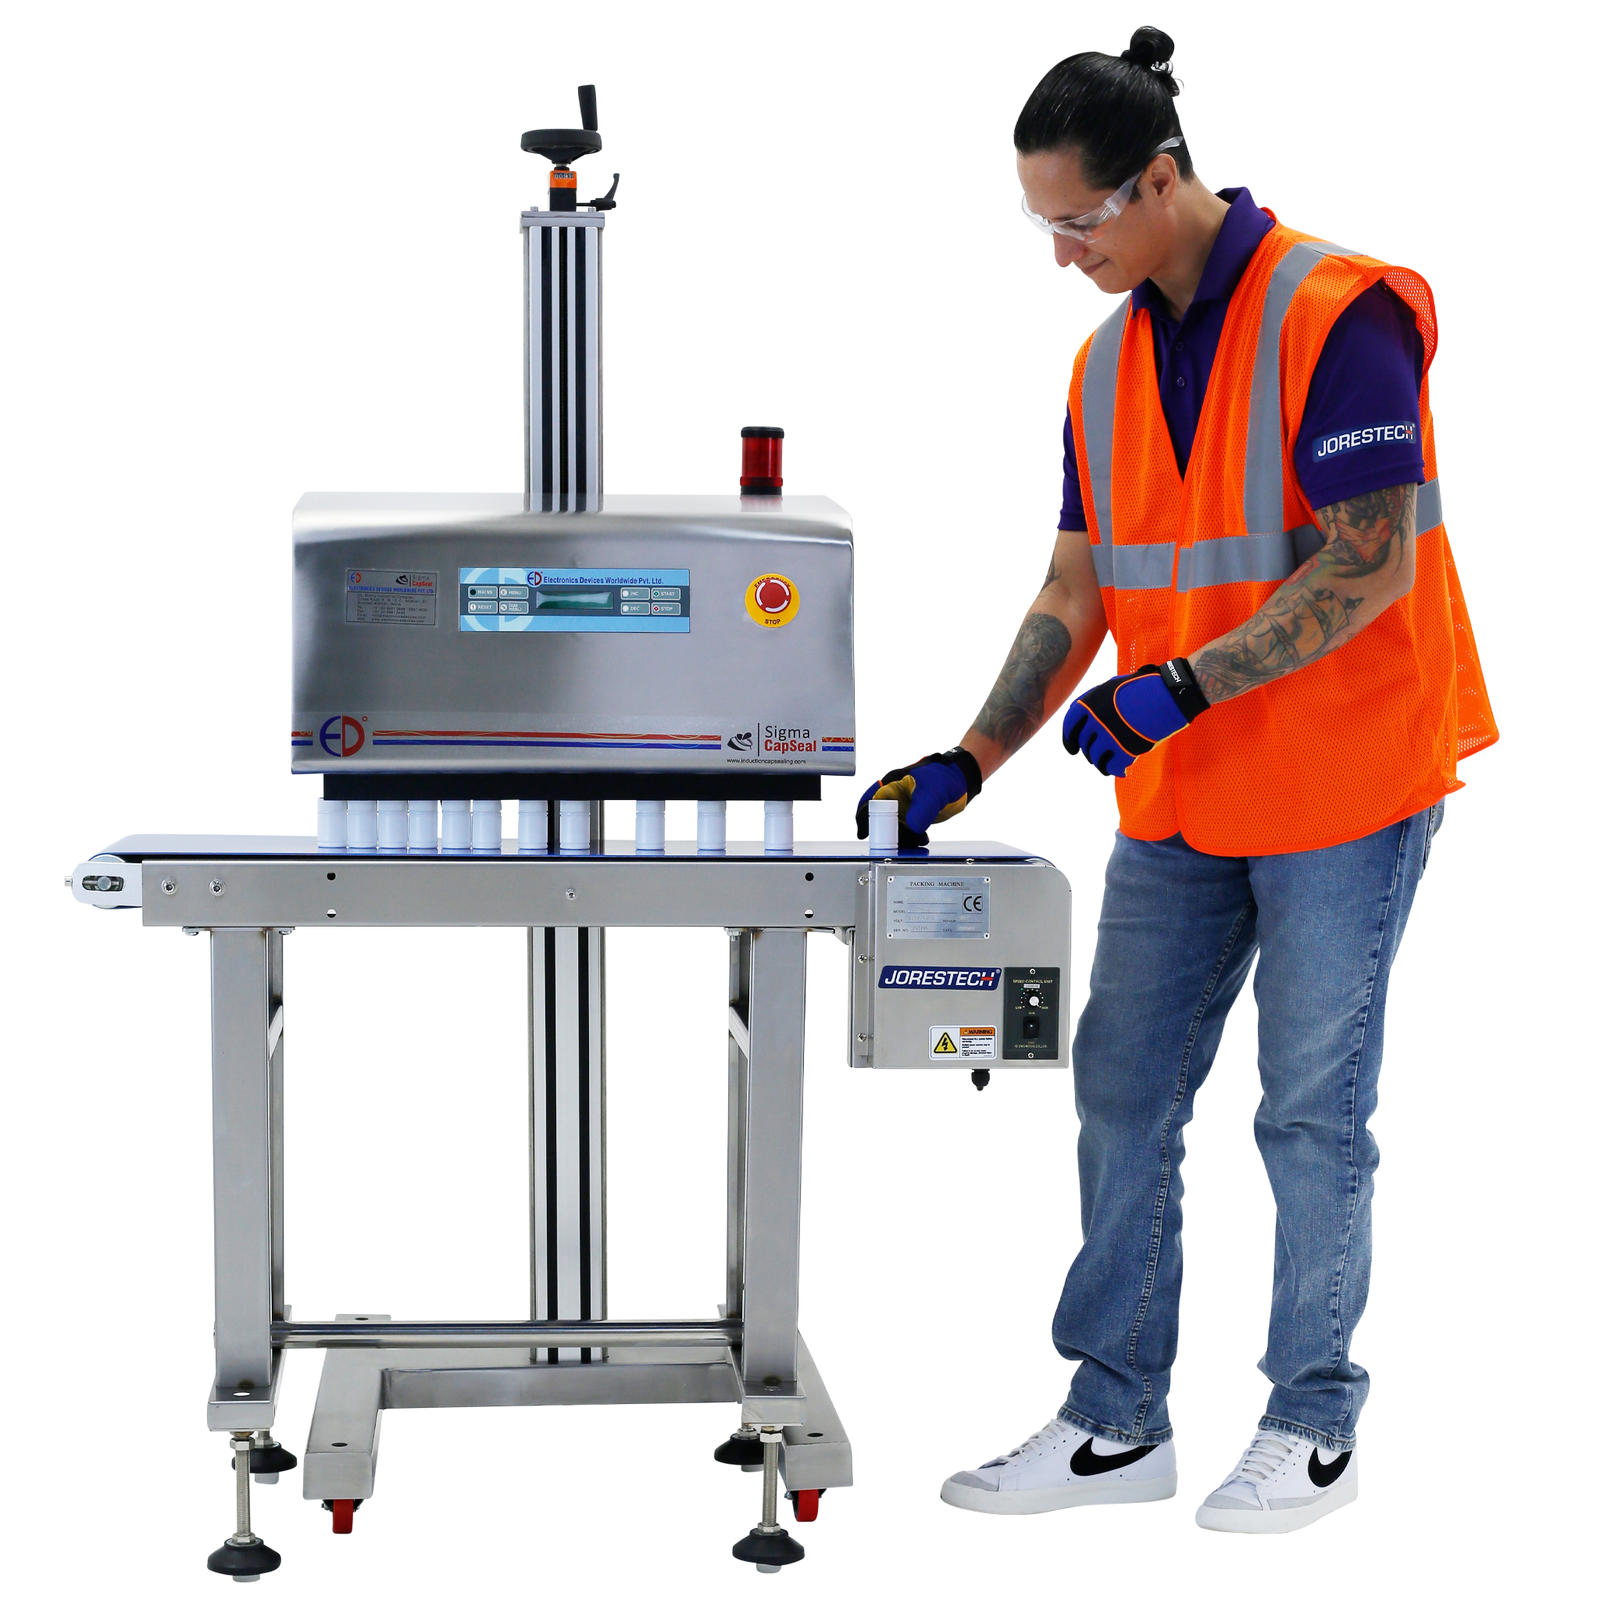 Operator wearing a high visibility orange vest can be seen placing white containers on a conveyor so that they can be sealed by an induction sealer for caps